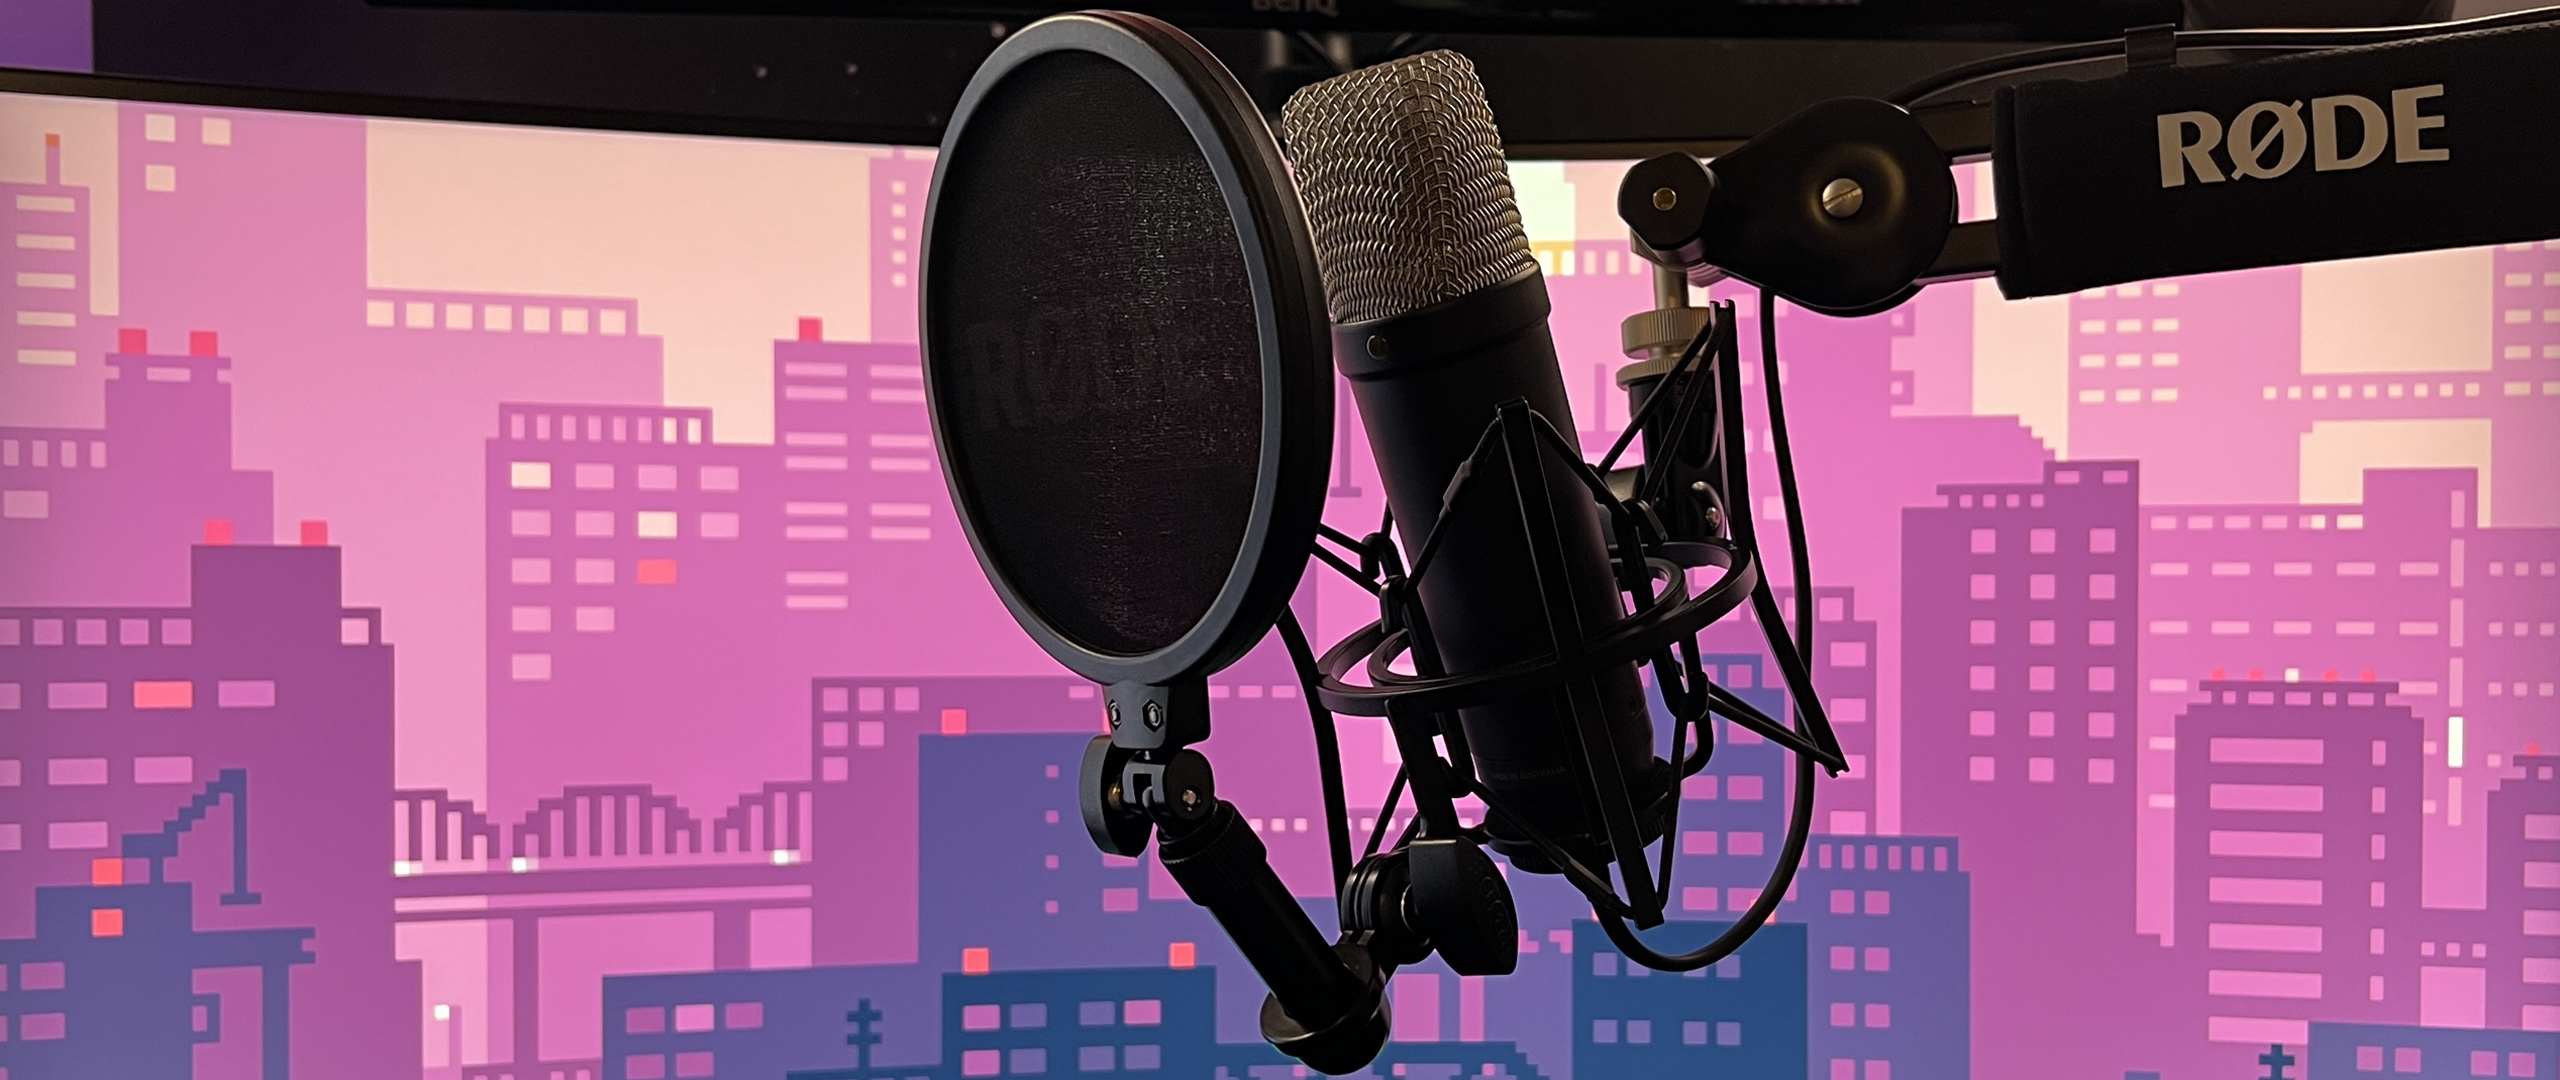 Rode NT1 5th Generation Mic Review: Dual Connectivity | Tom's Hardware